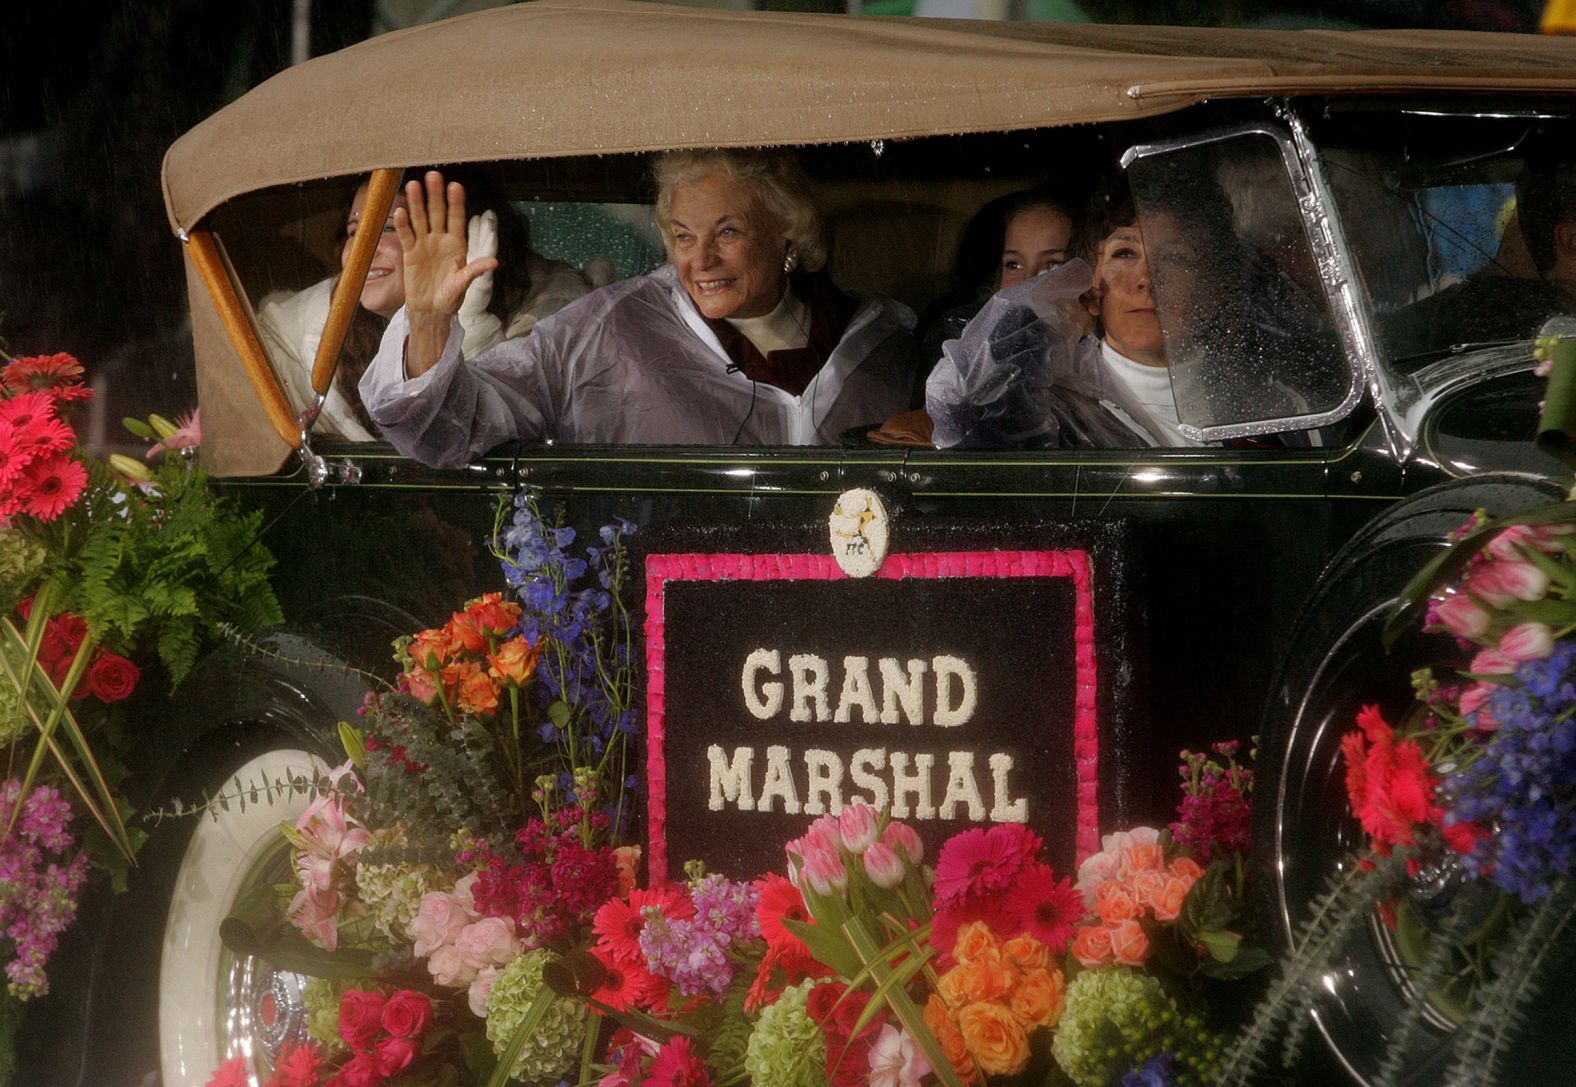 O'Connor waves during the Rose Parade in Pasadena, California, in 2006. She was accompanied by her grandchildren.